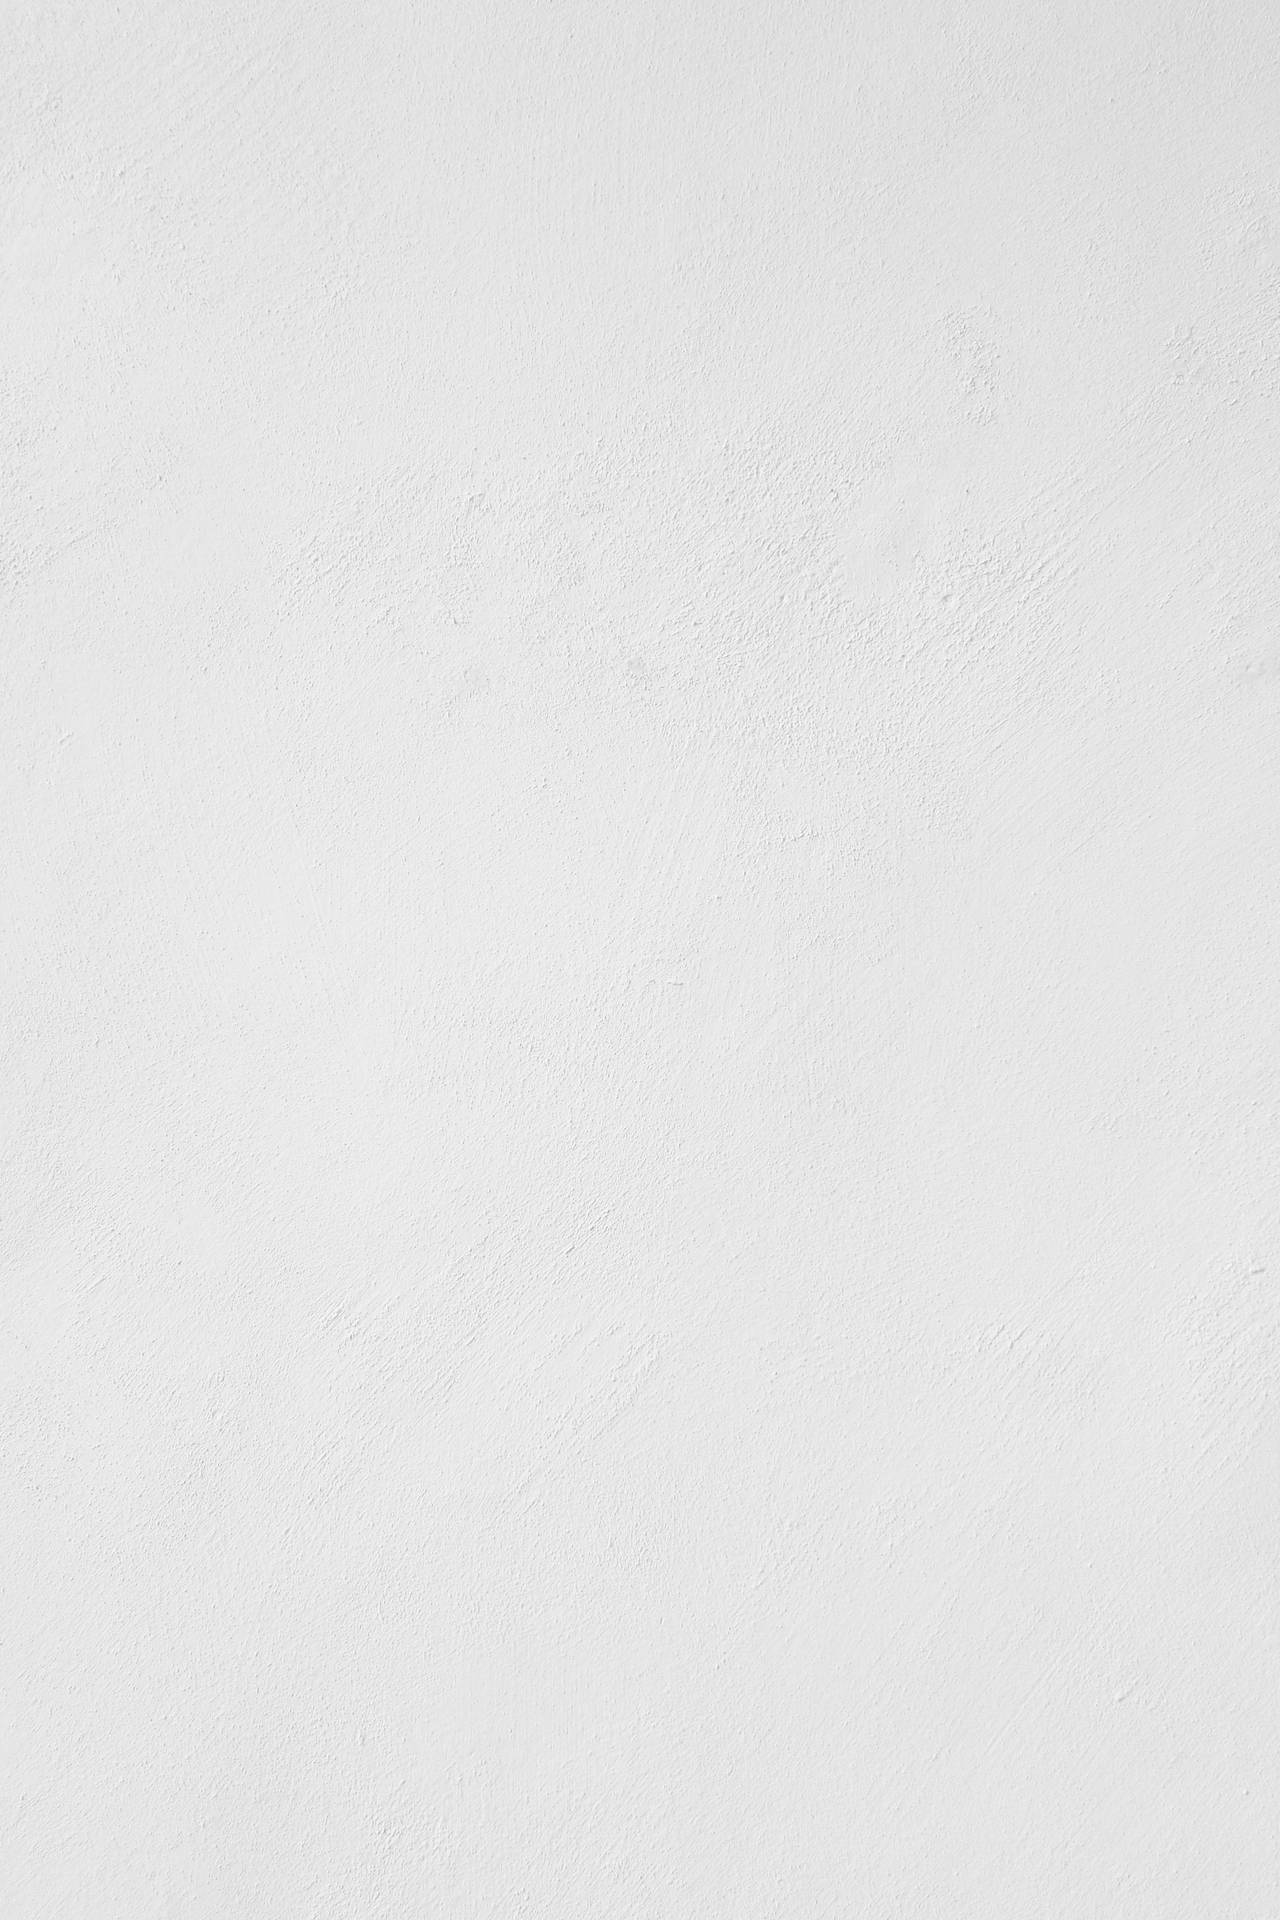 Solid White Gray Background